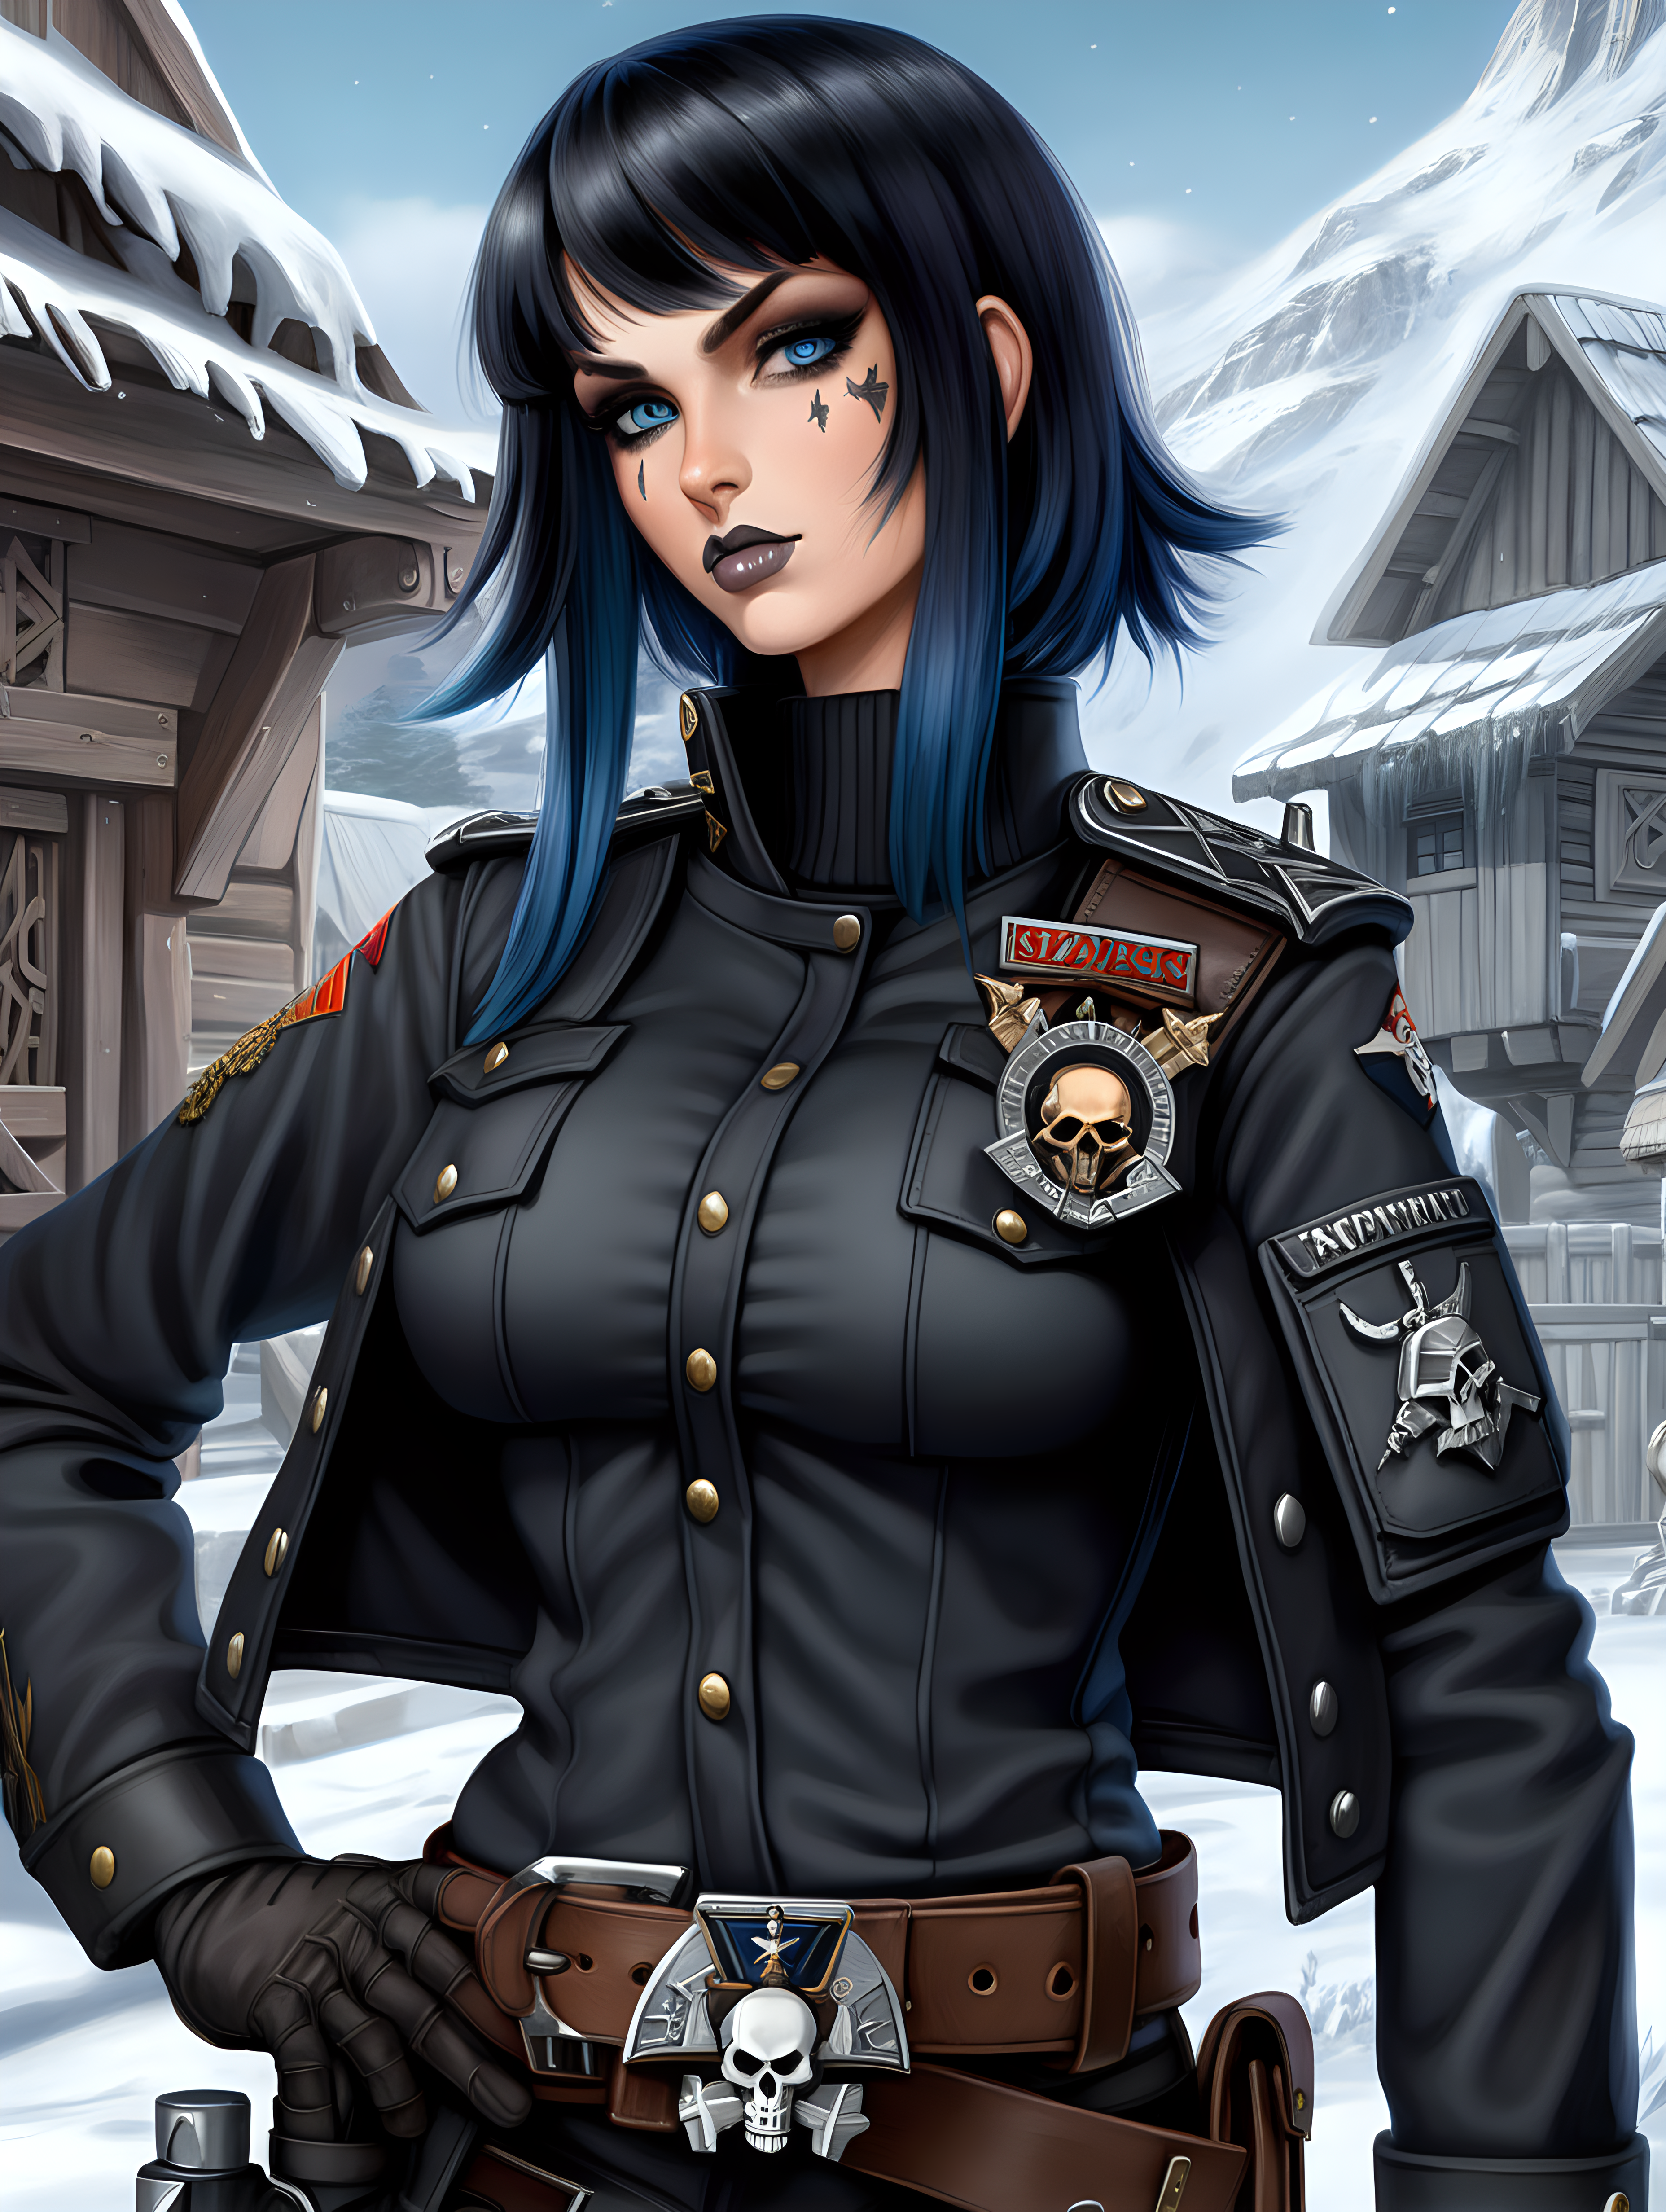 Warhammer 40K young very busty Commissar woman She